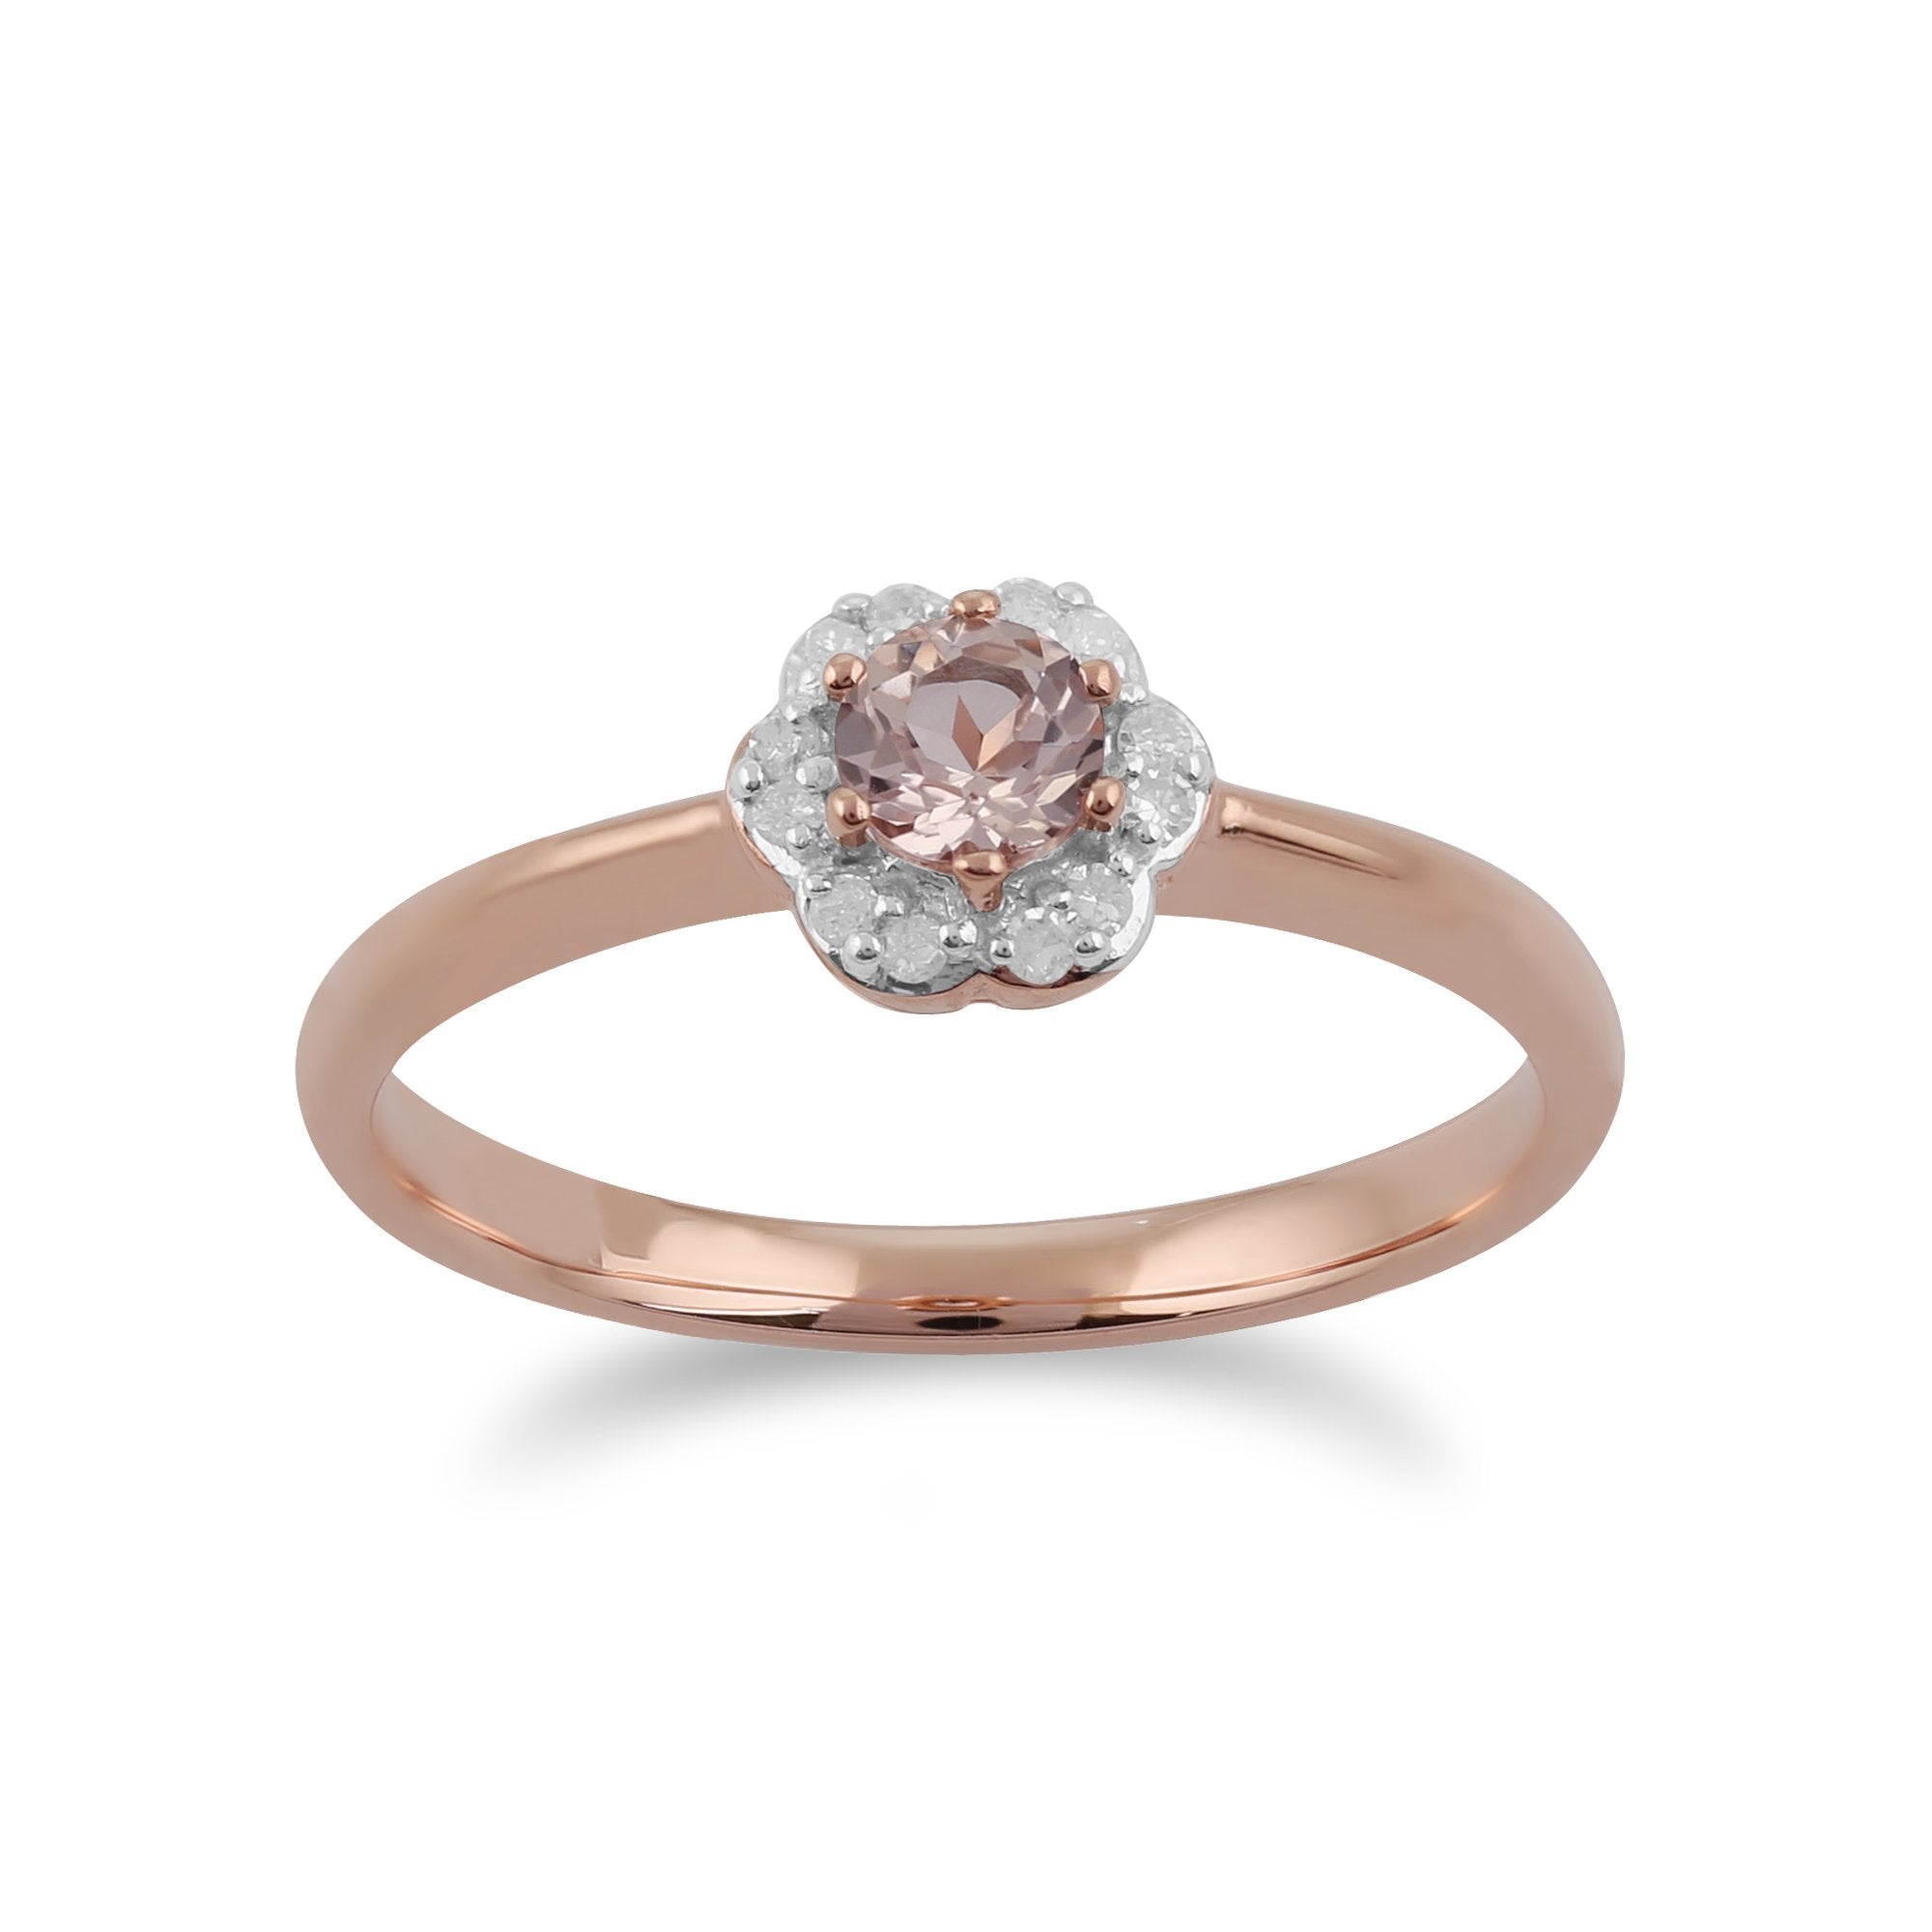 Classic Round Morganite & Diamond Floral Ring in 9ct Rose Gold